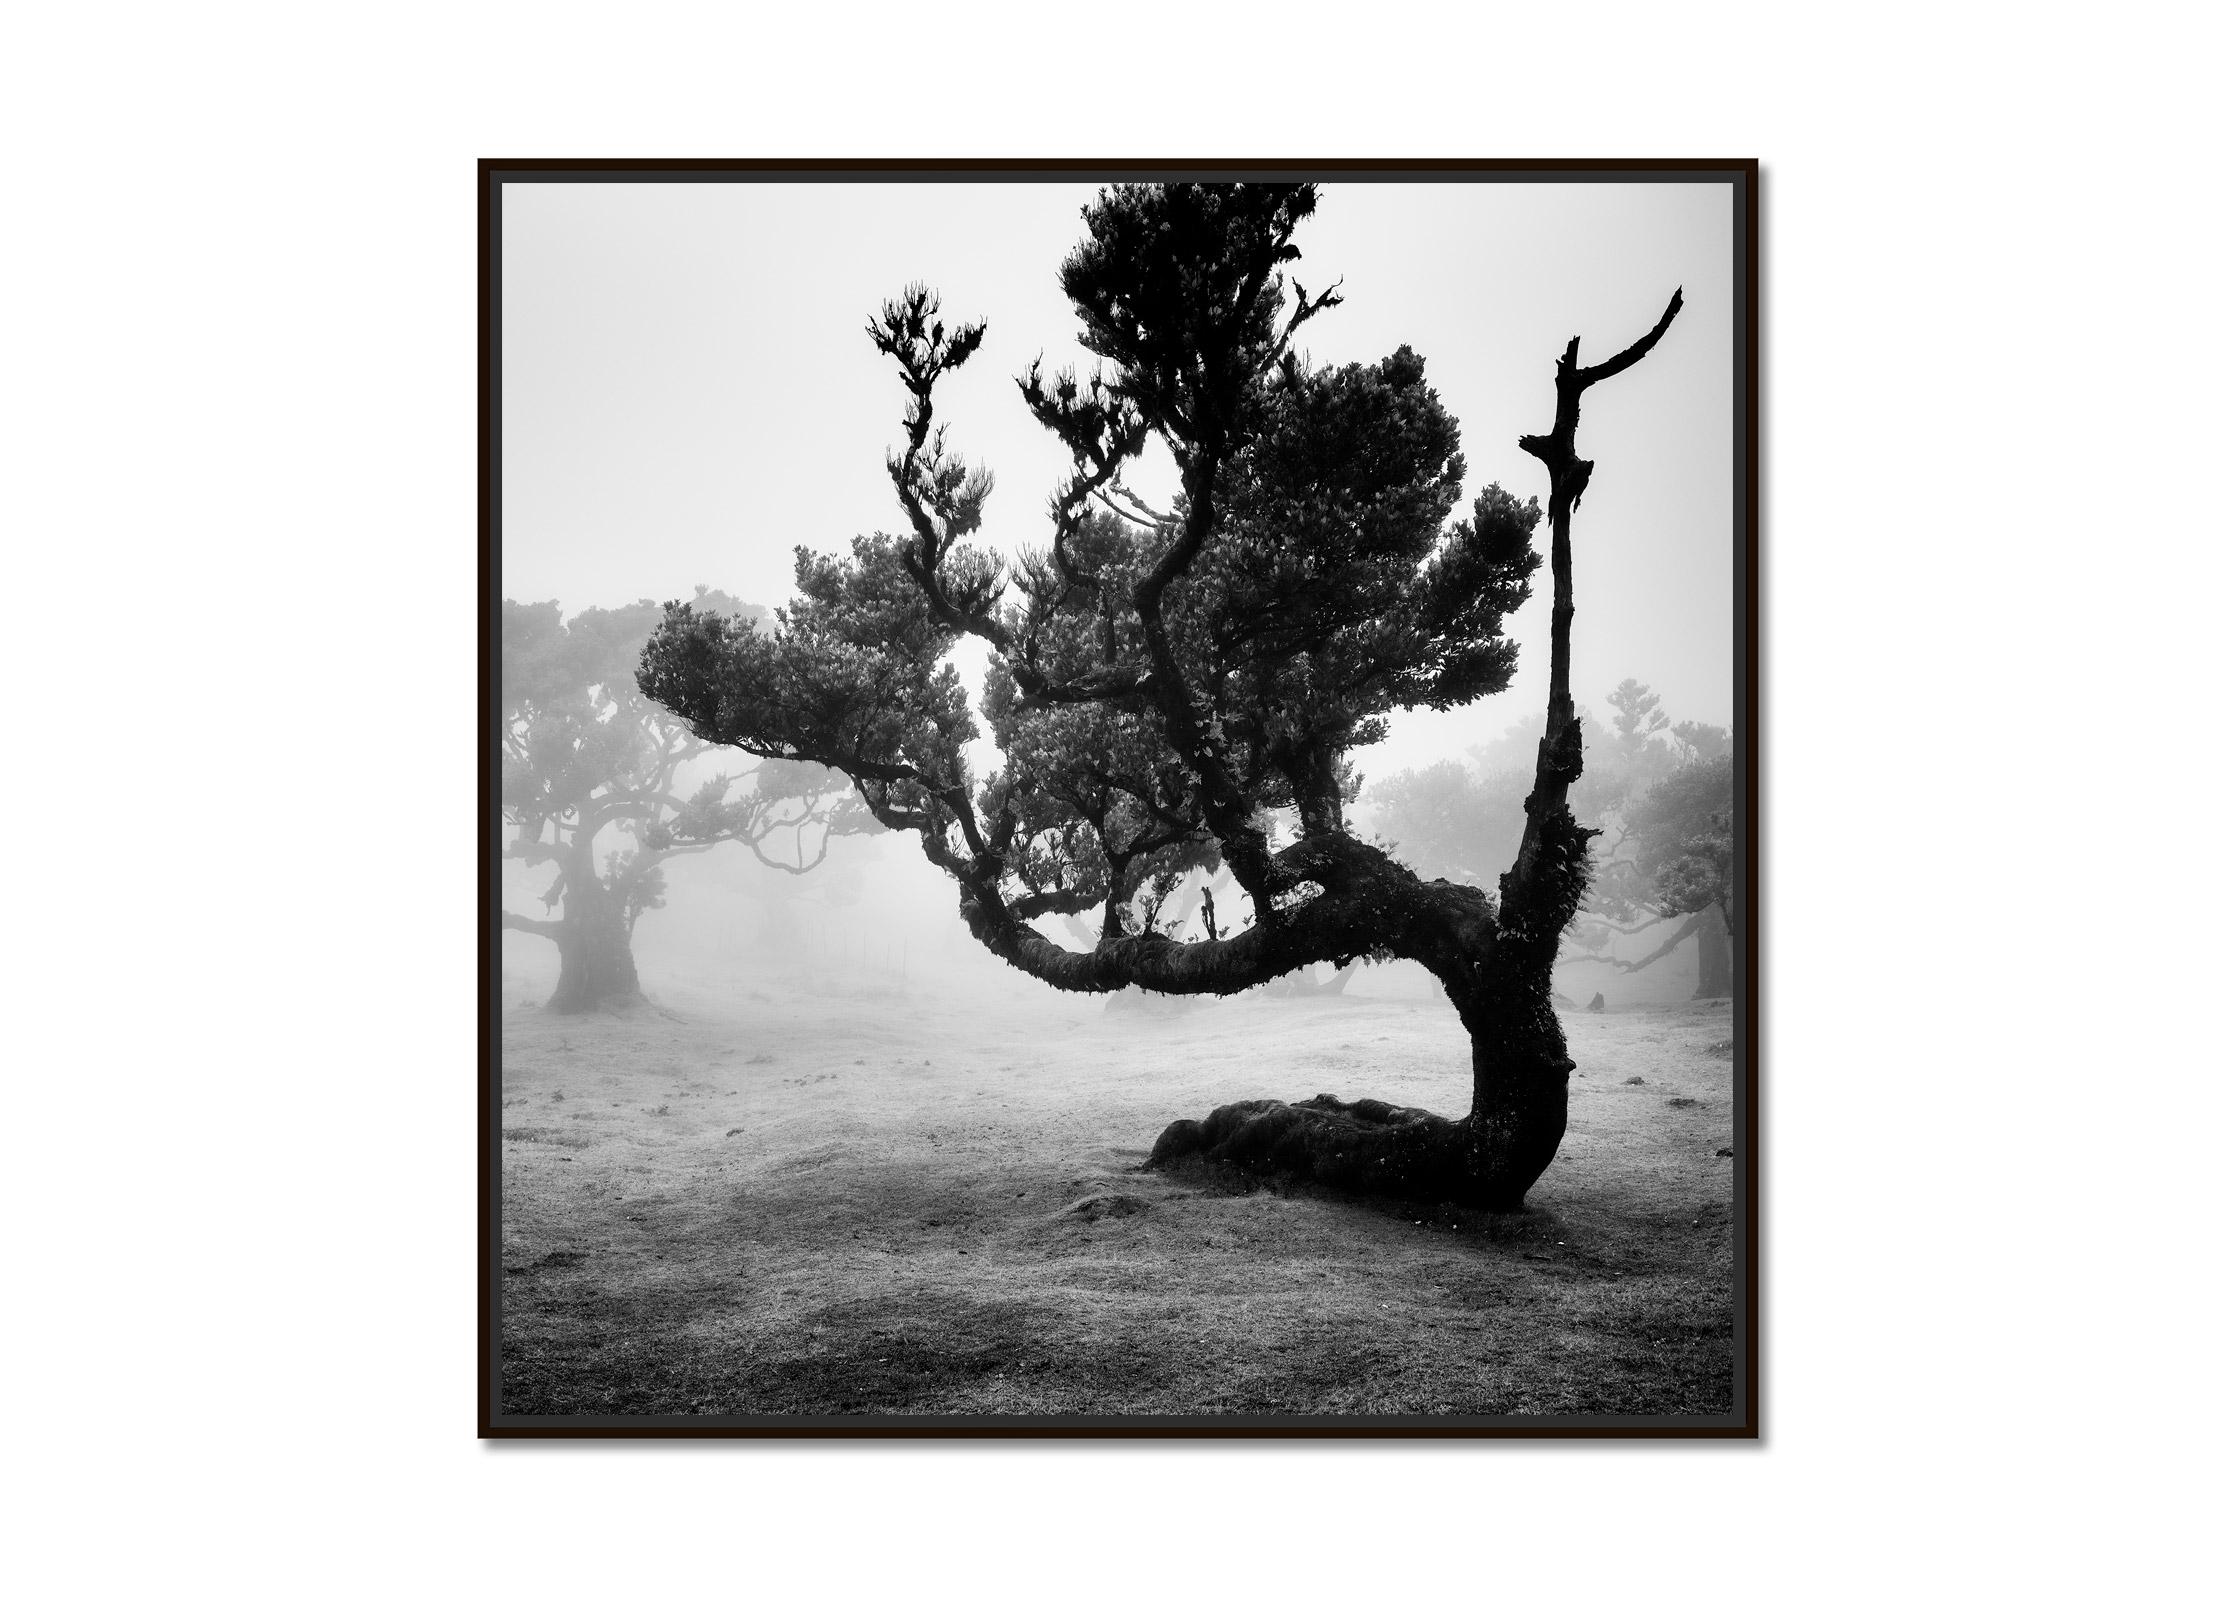 Ancient Laurisilva Forest, curved Tree, black and white landscape art photograph - Photograph by Gerald Berghammer